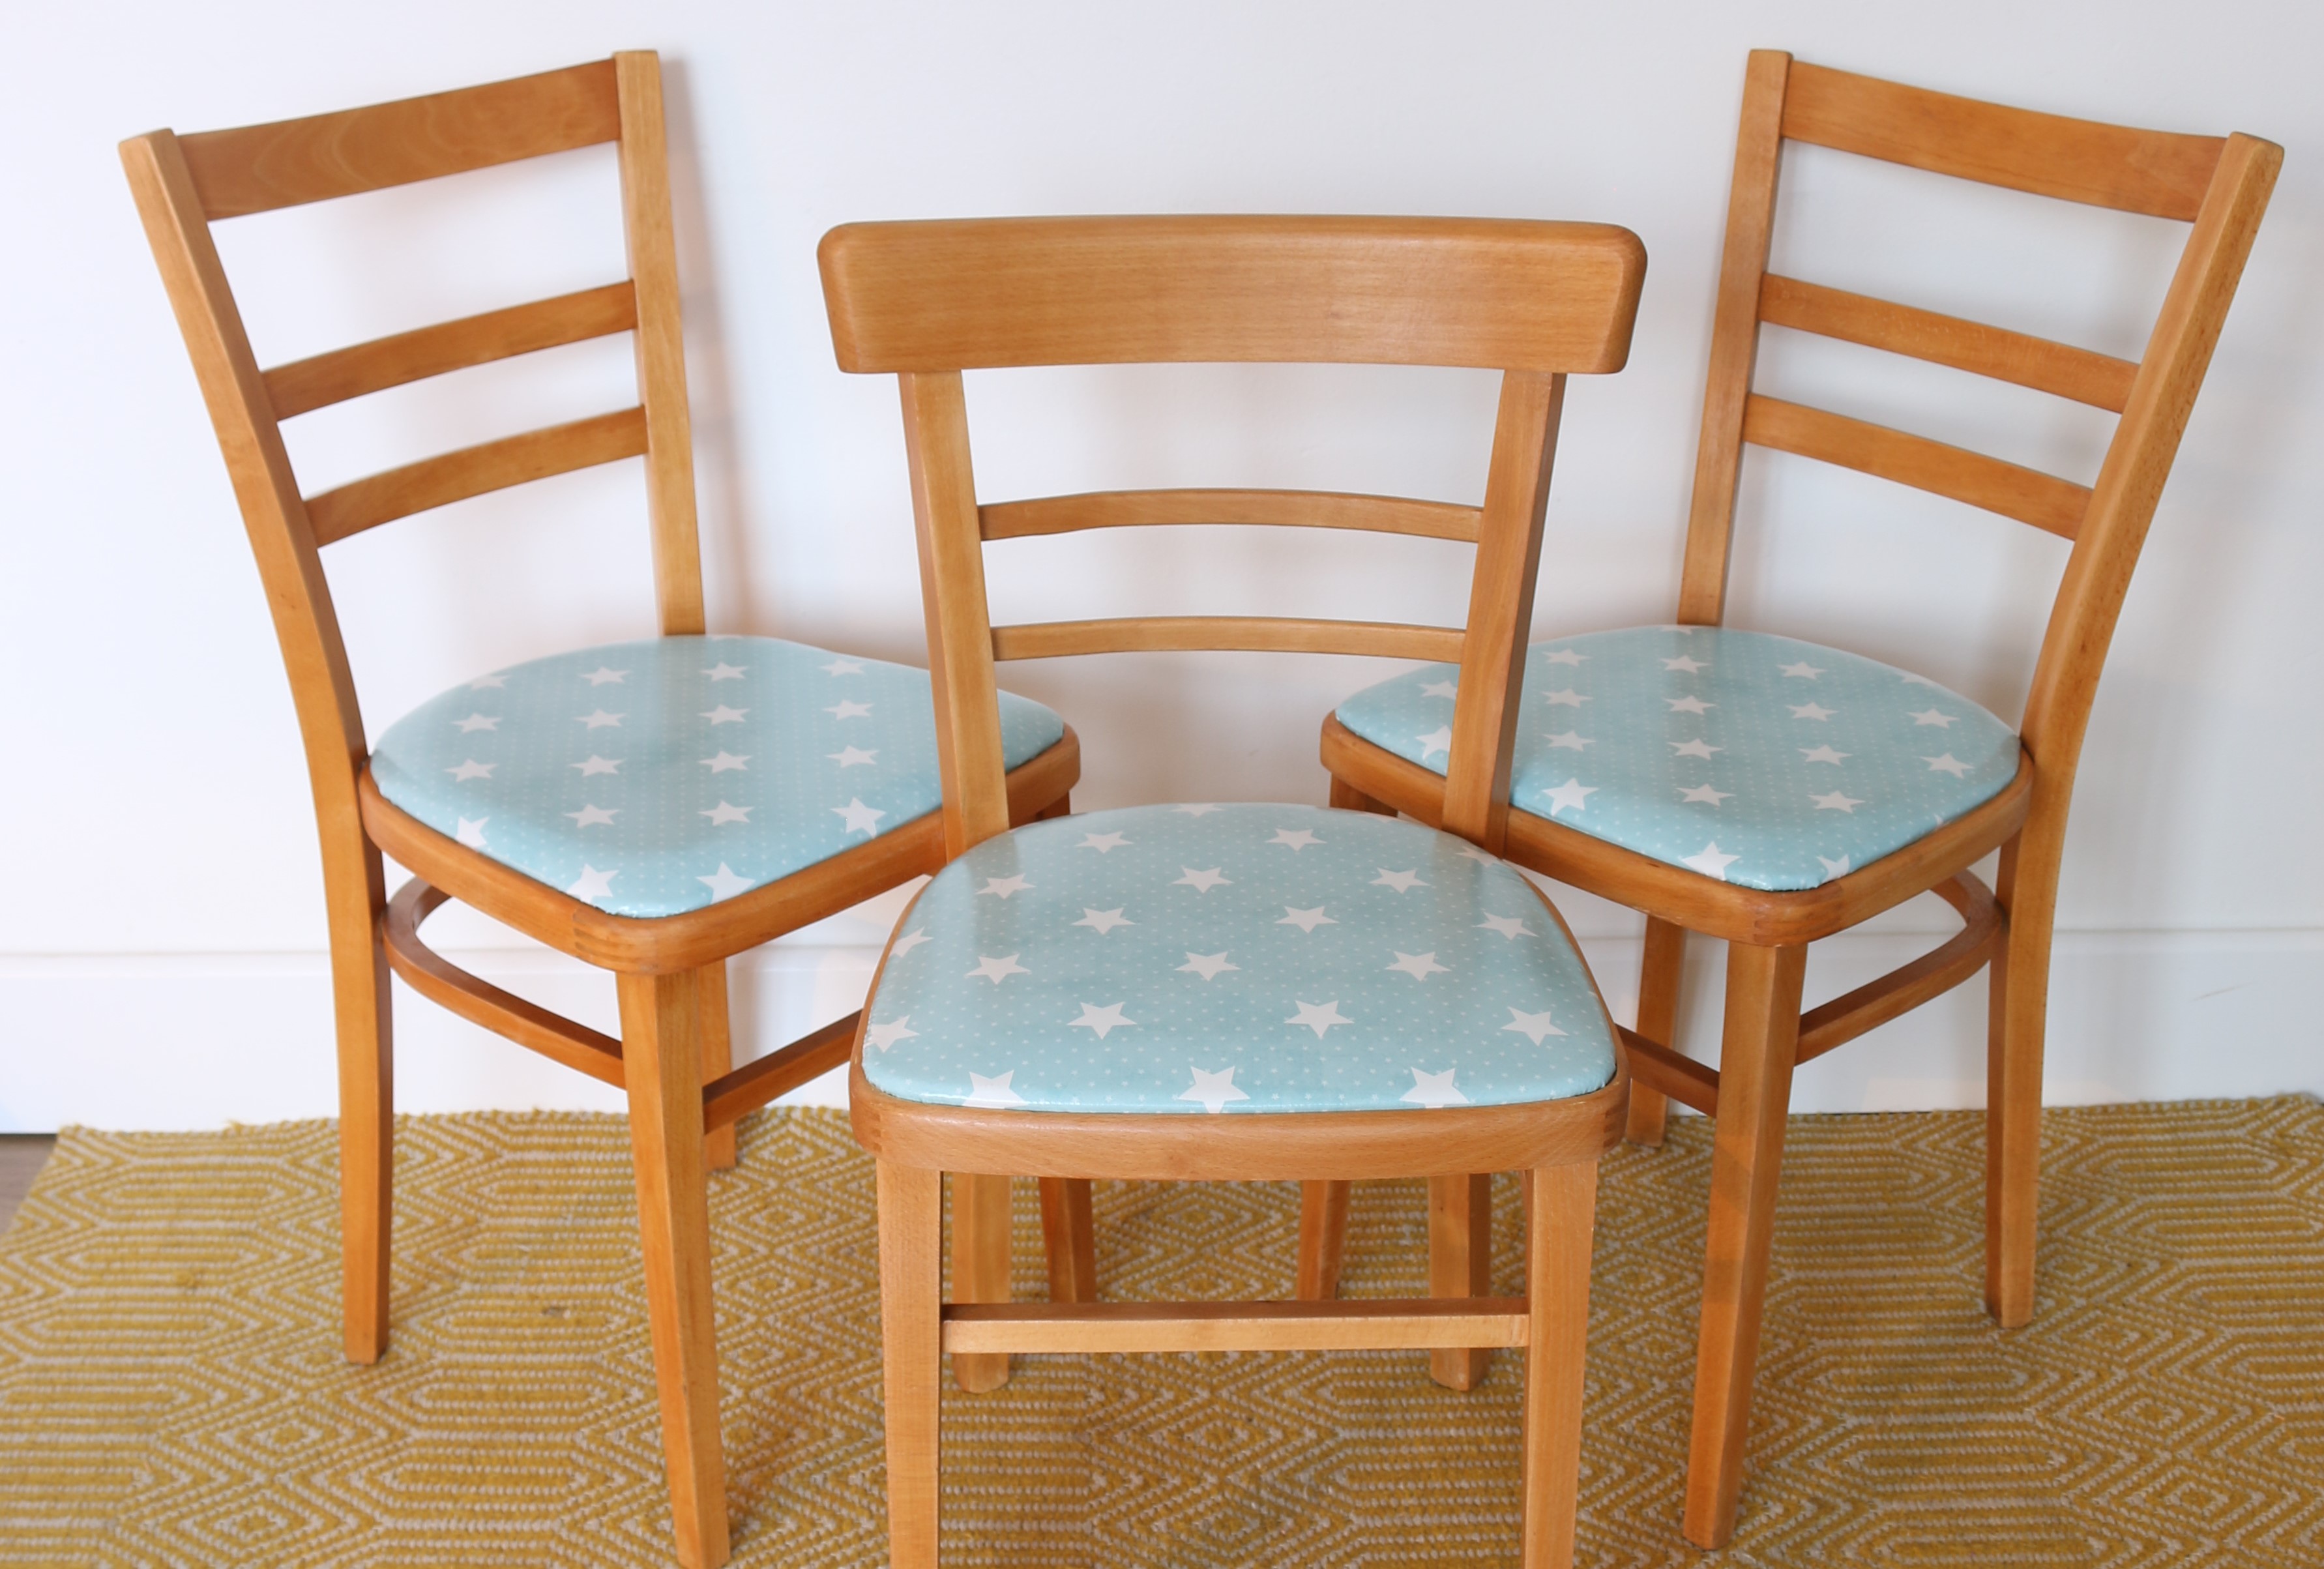 Kitchen Chairs Revamp Upcycling Project Youtube Video Tutorial Step By Step Guide 